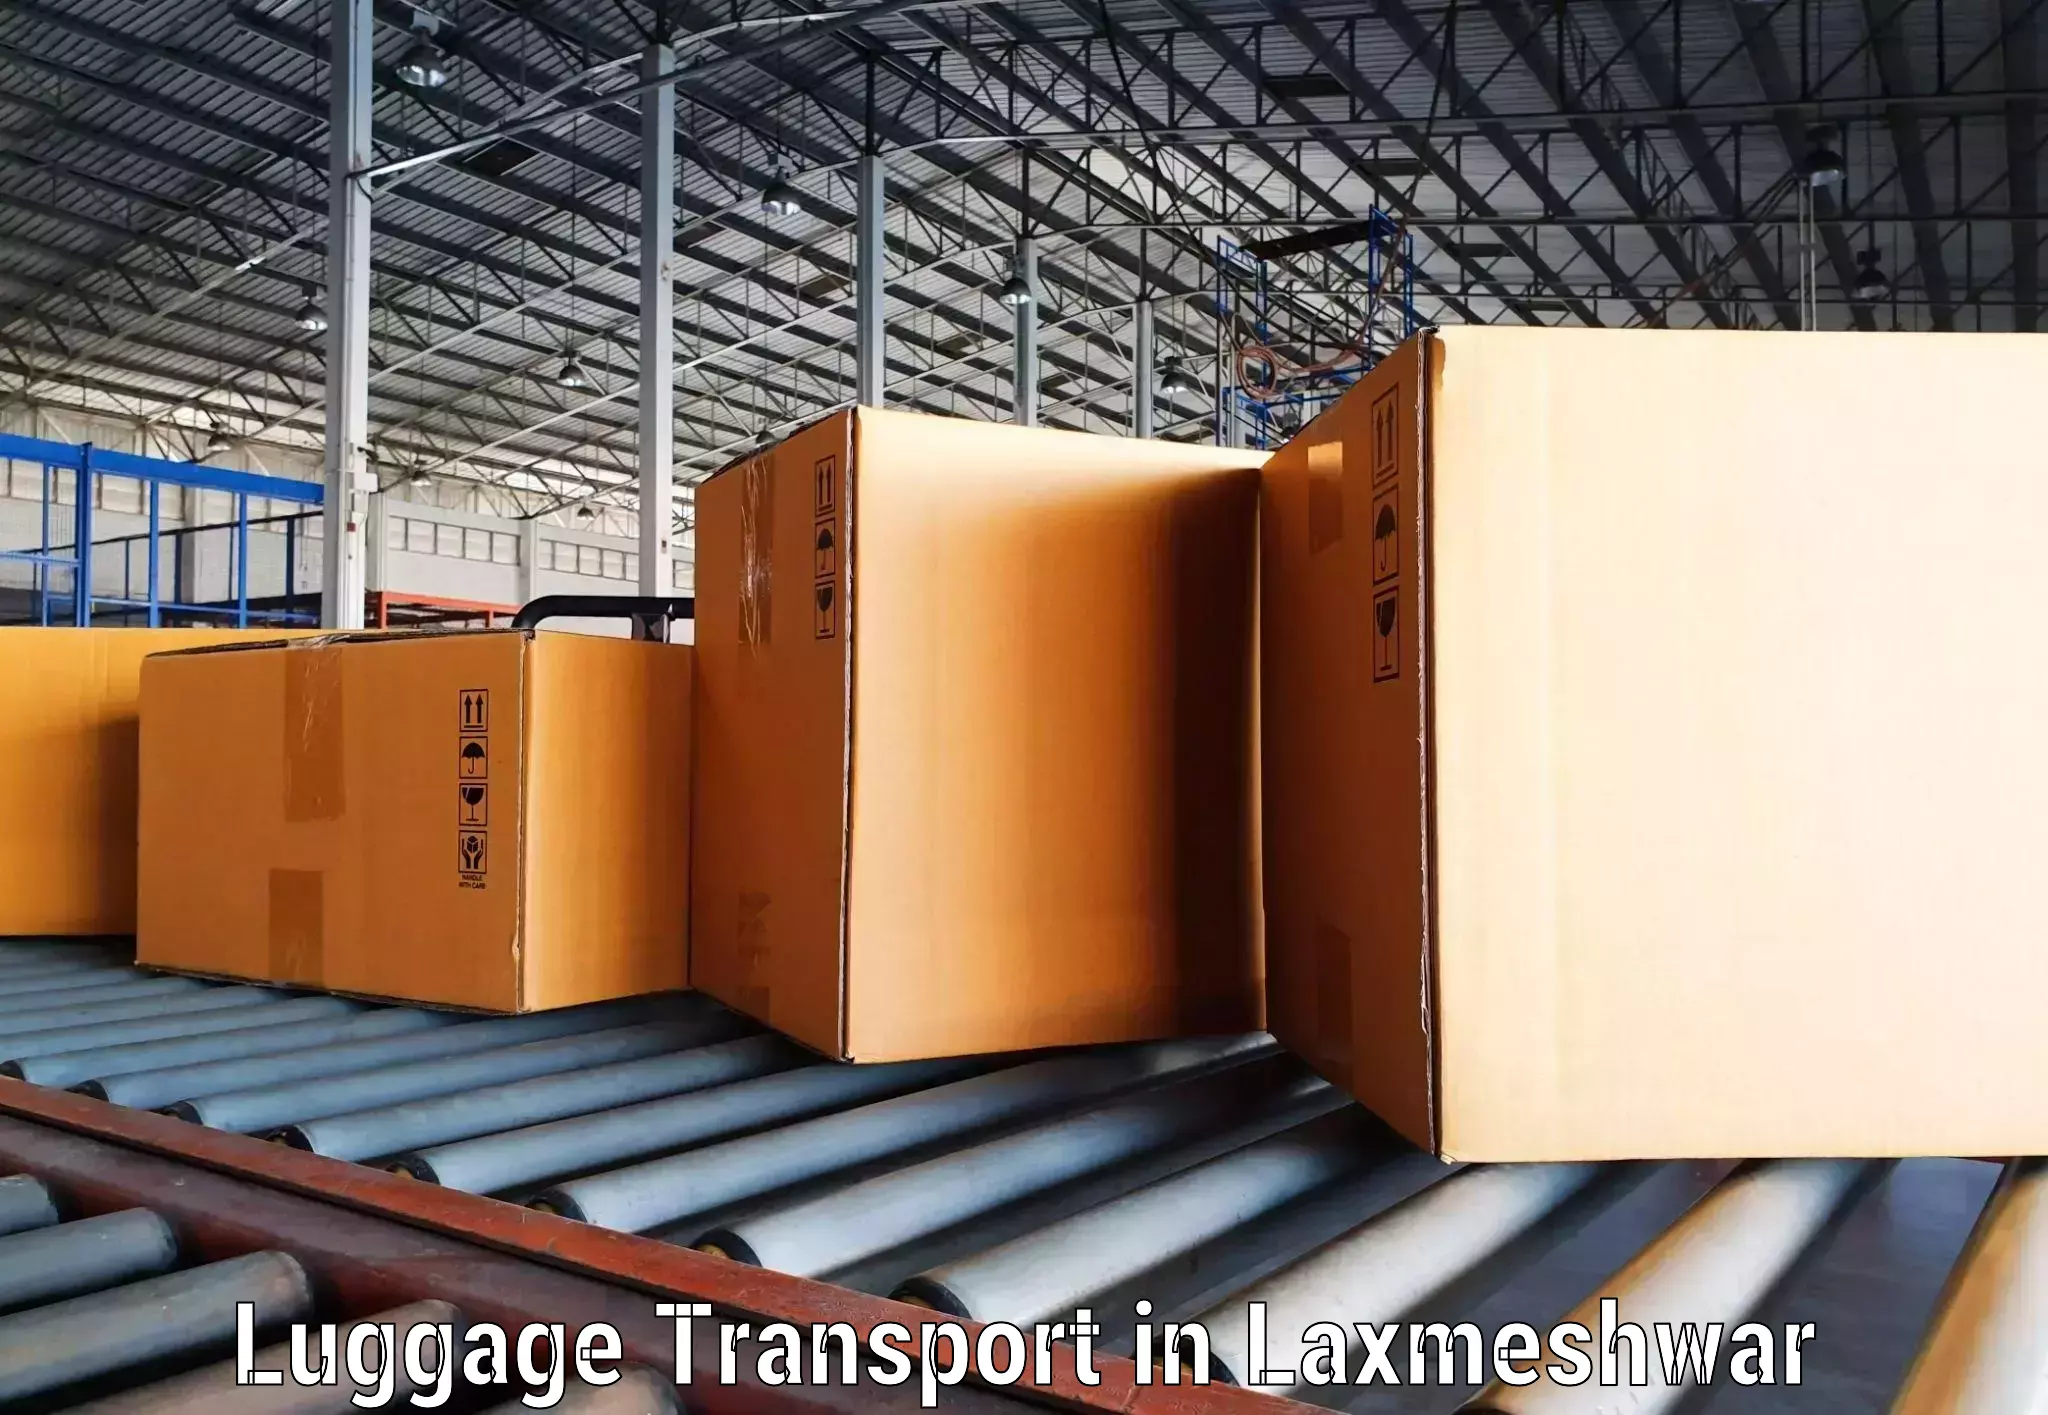 Luggage transport operations in Laxmeshwar